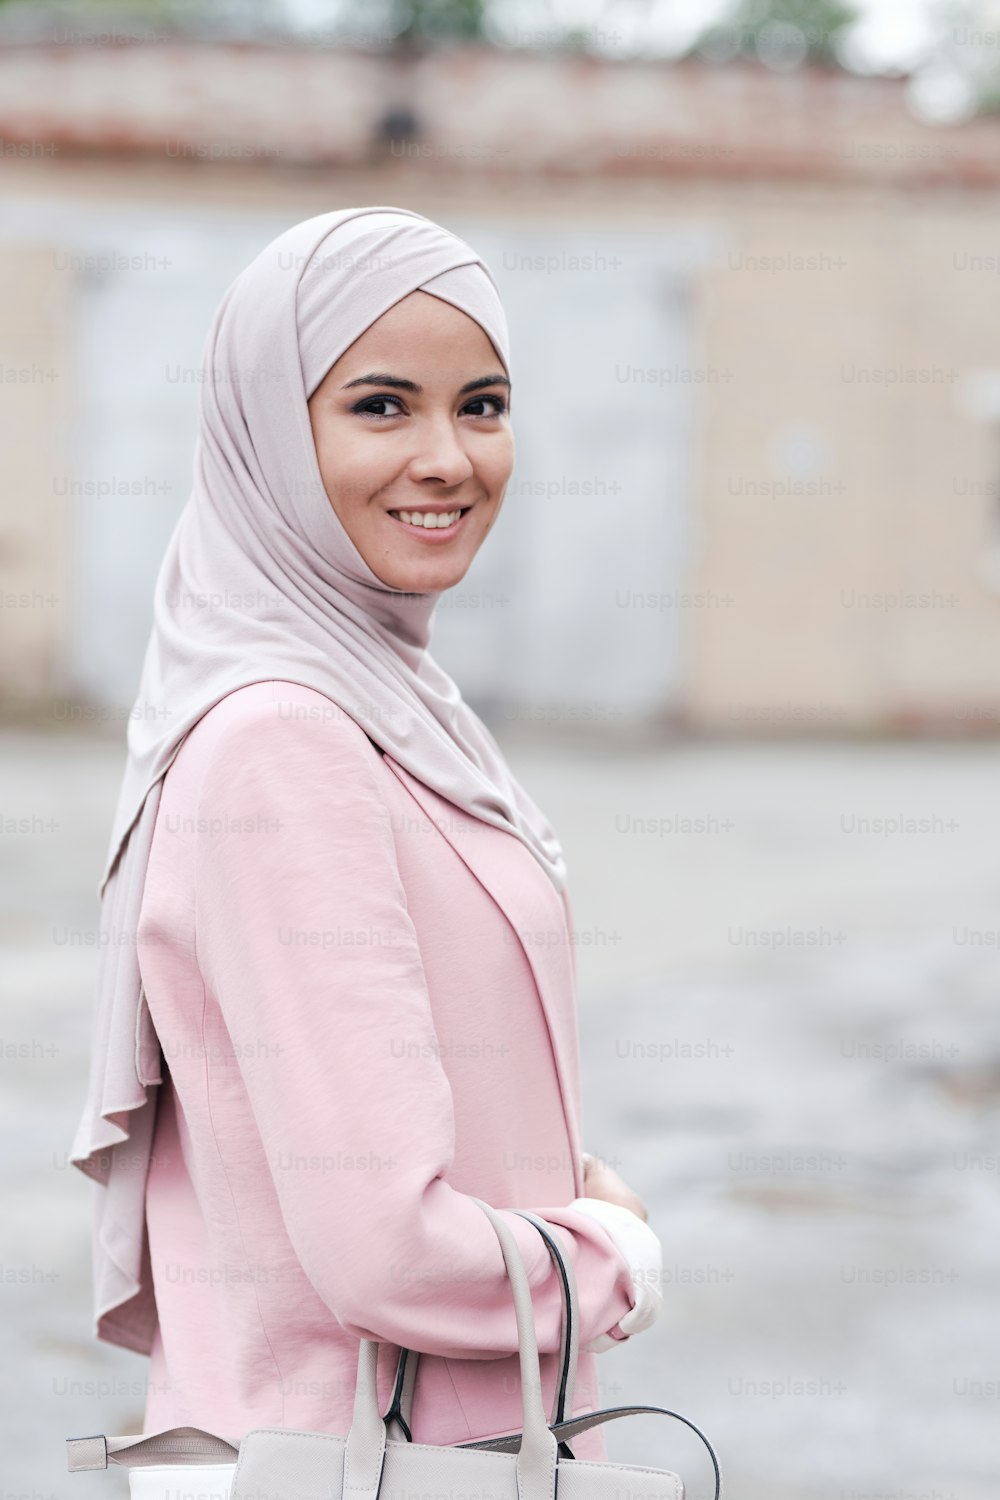 Young cheerful Muslim woman in hijab and pink cardigan holding handbag while smiling at you in front of camera in urban environment